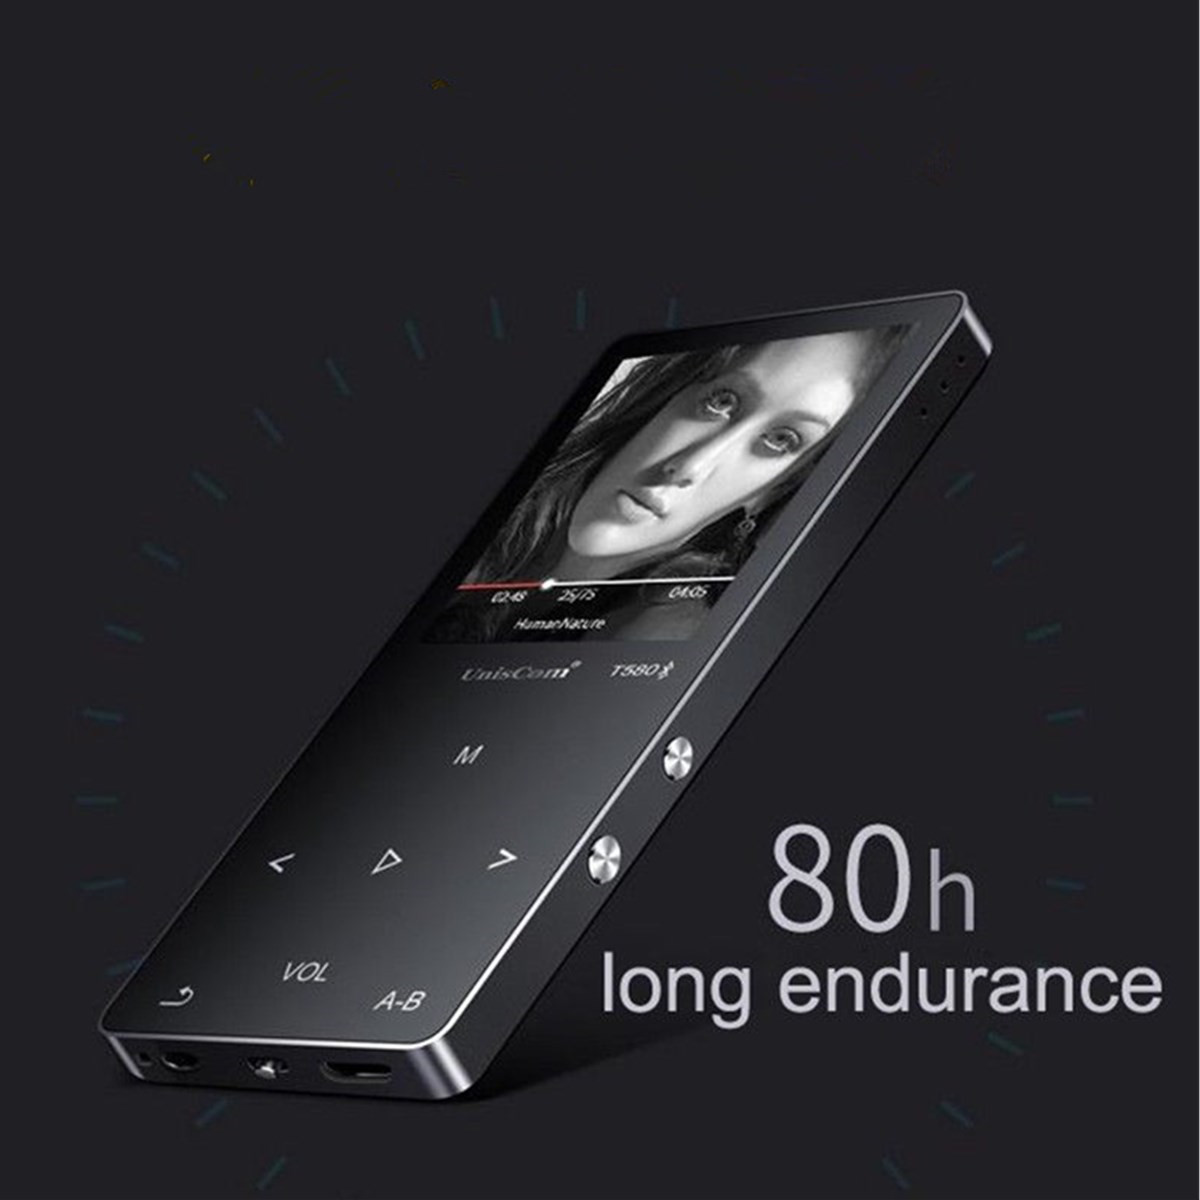 Uniscom 8G 1.8 Inch Screen bluetooth Lossless HIFI MP3 Music Player Support A-B Repeat Voice Record 8